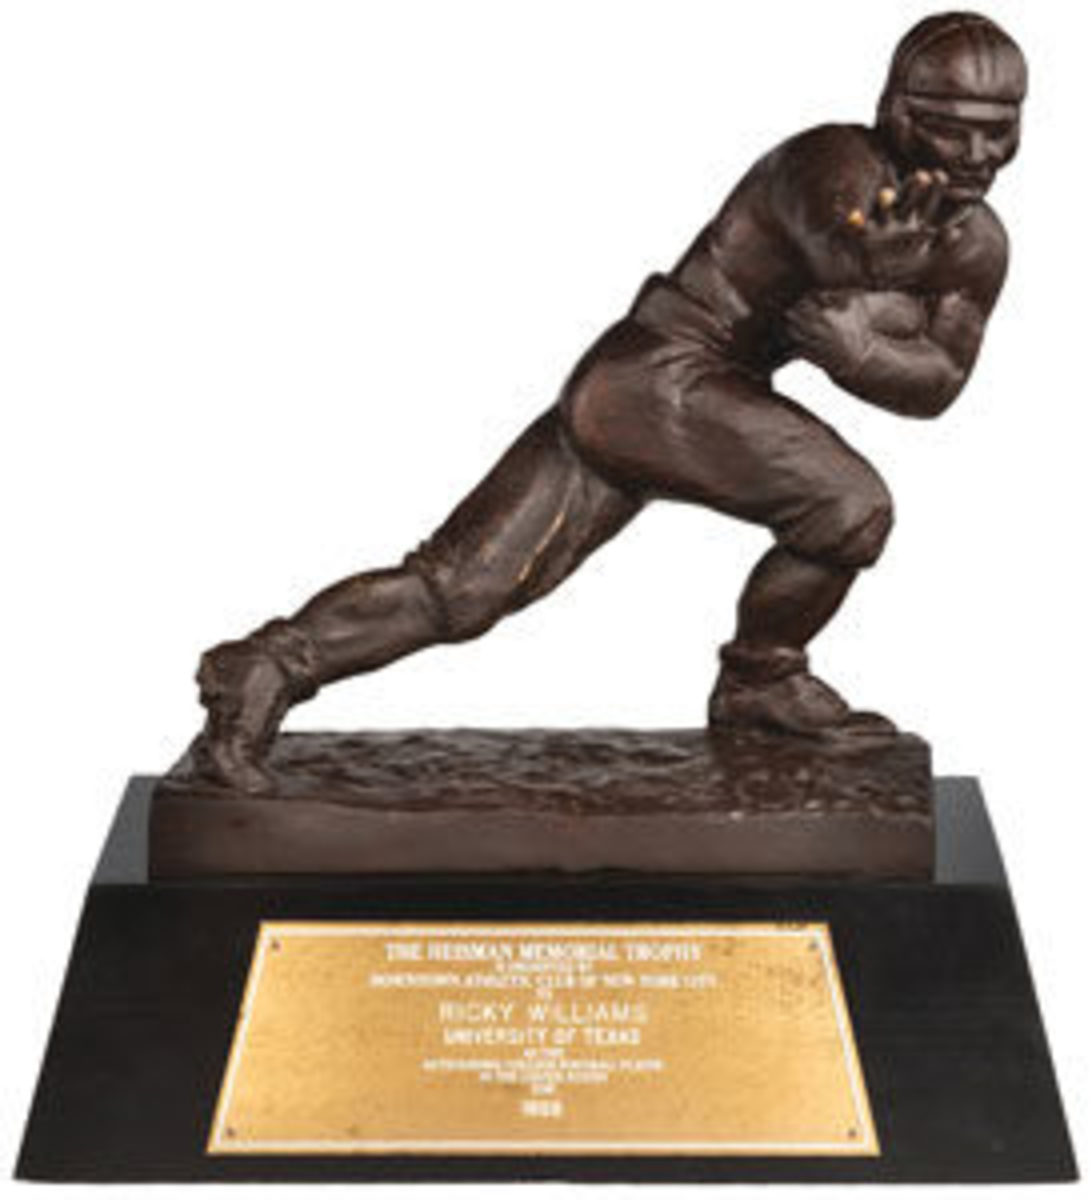  The 1998 Heisman Trophy. Image courtesy Heritage Auctions